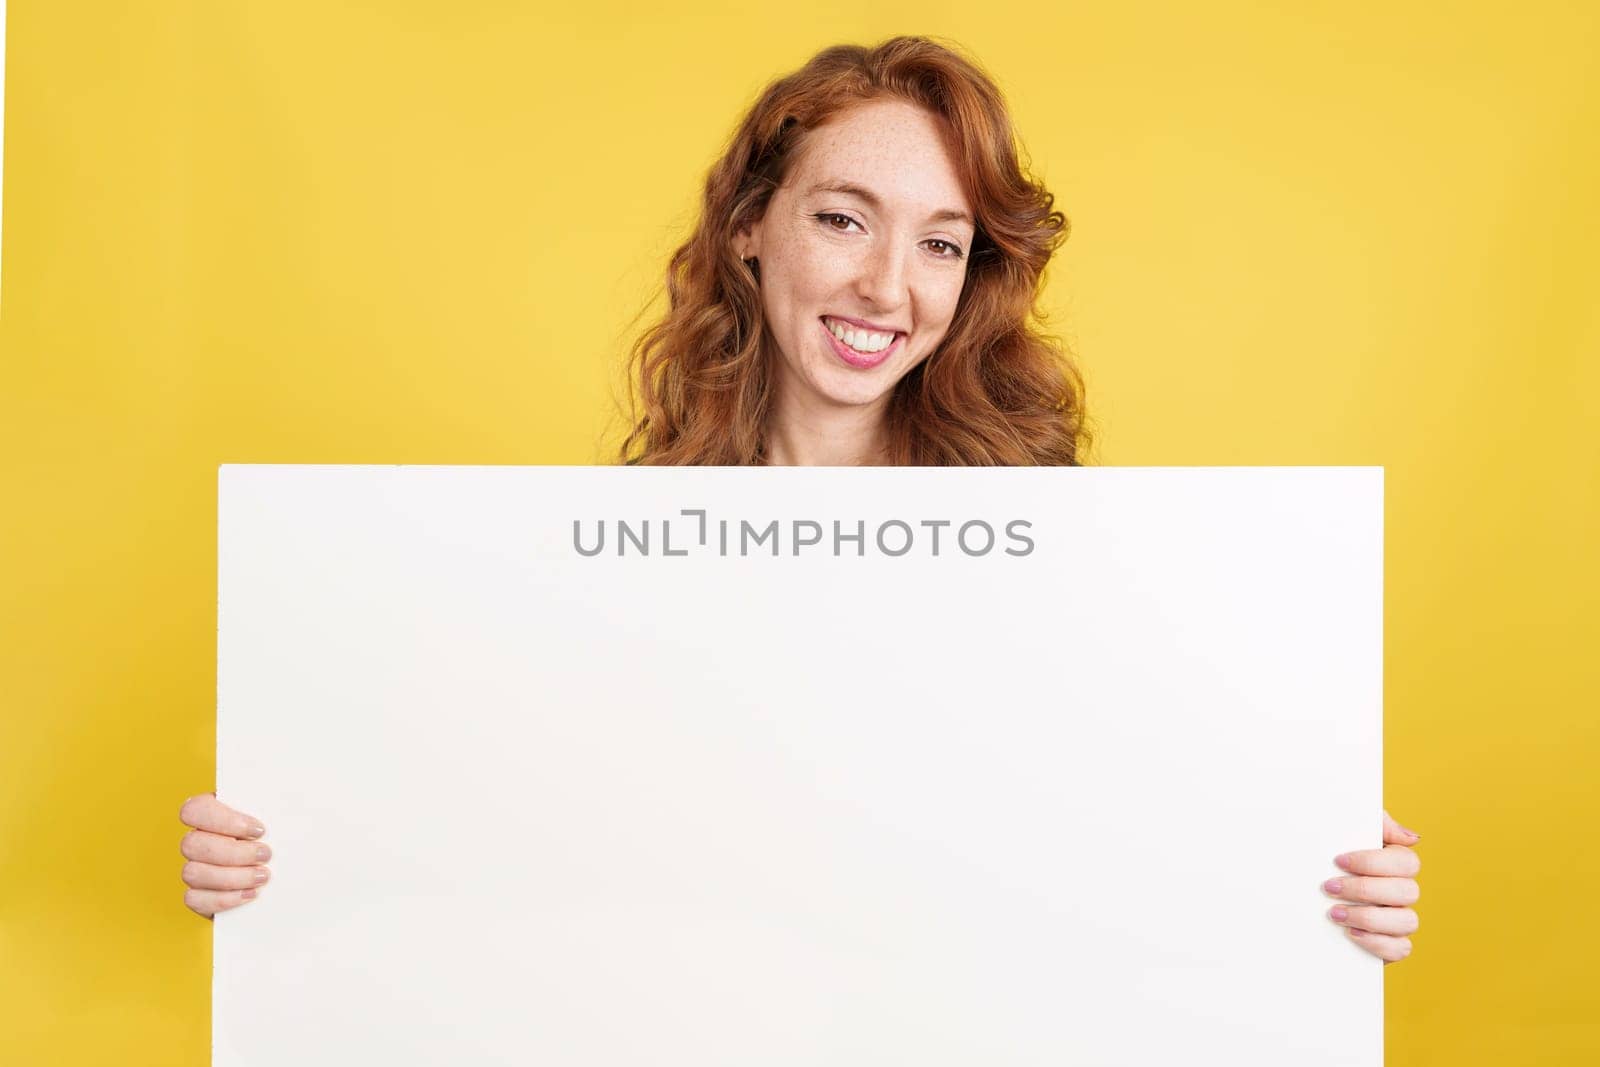 Redheaded woman holding a blank panel while smiling at the camera in studio with yellow background